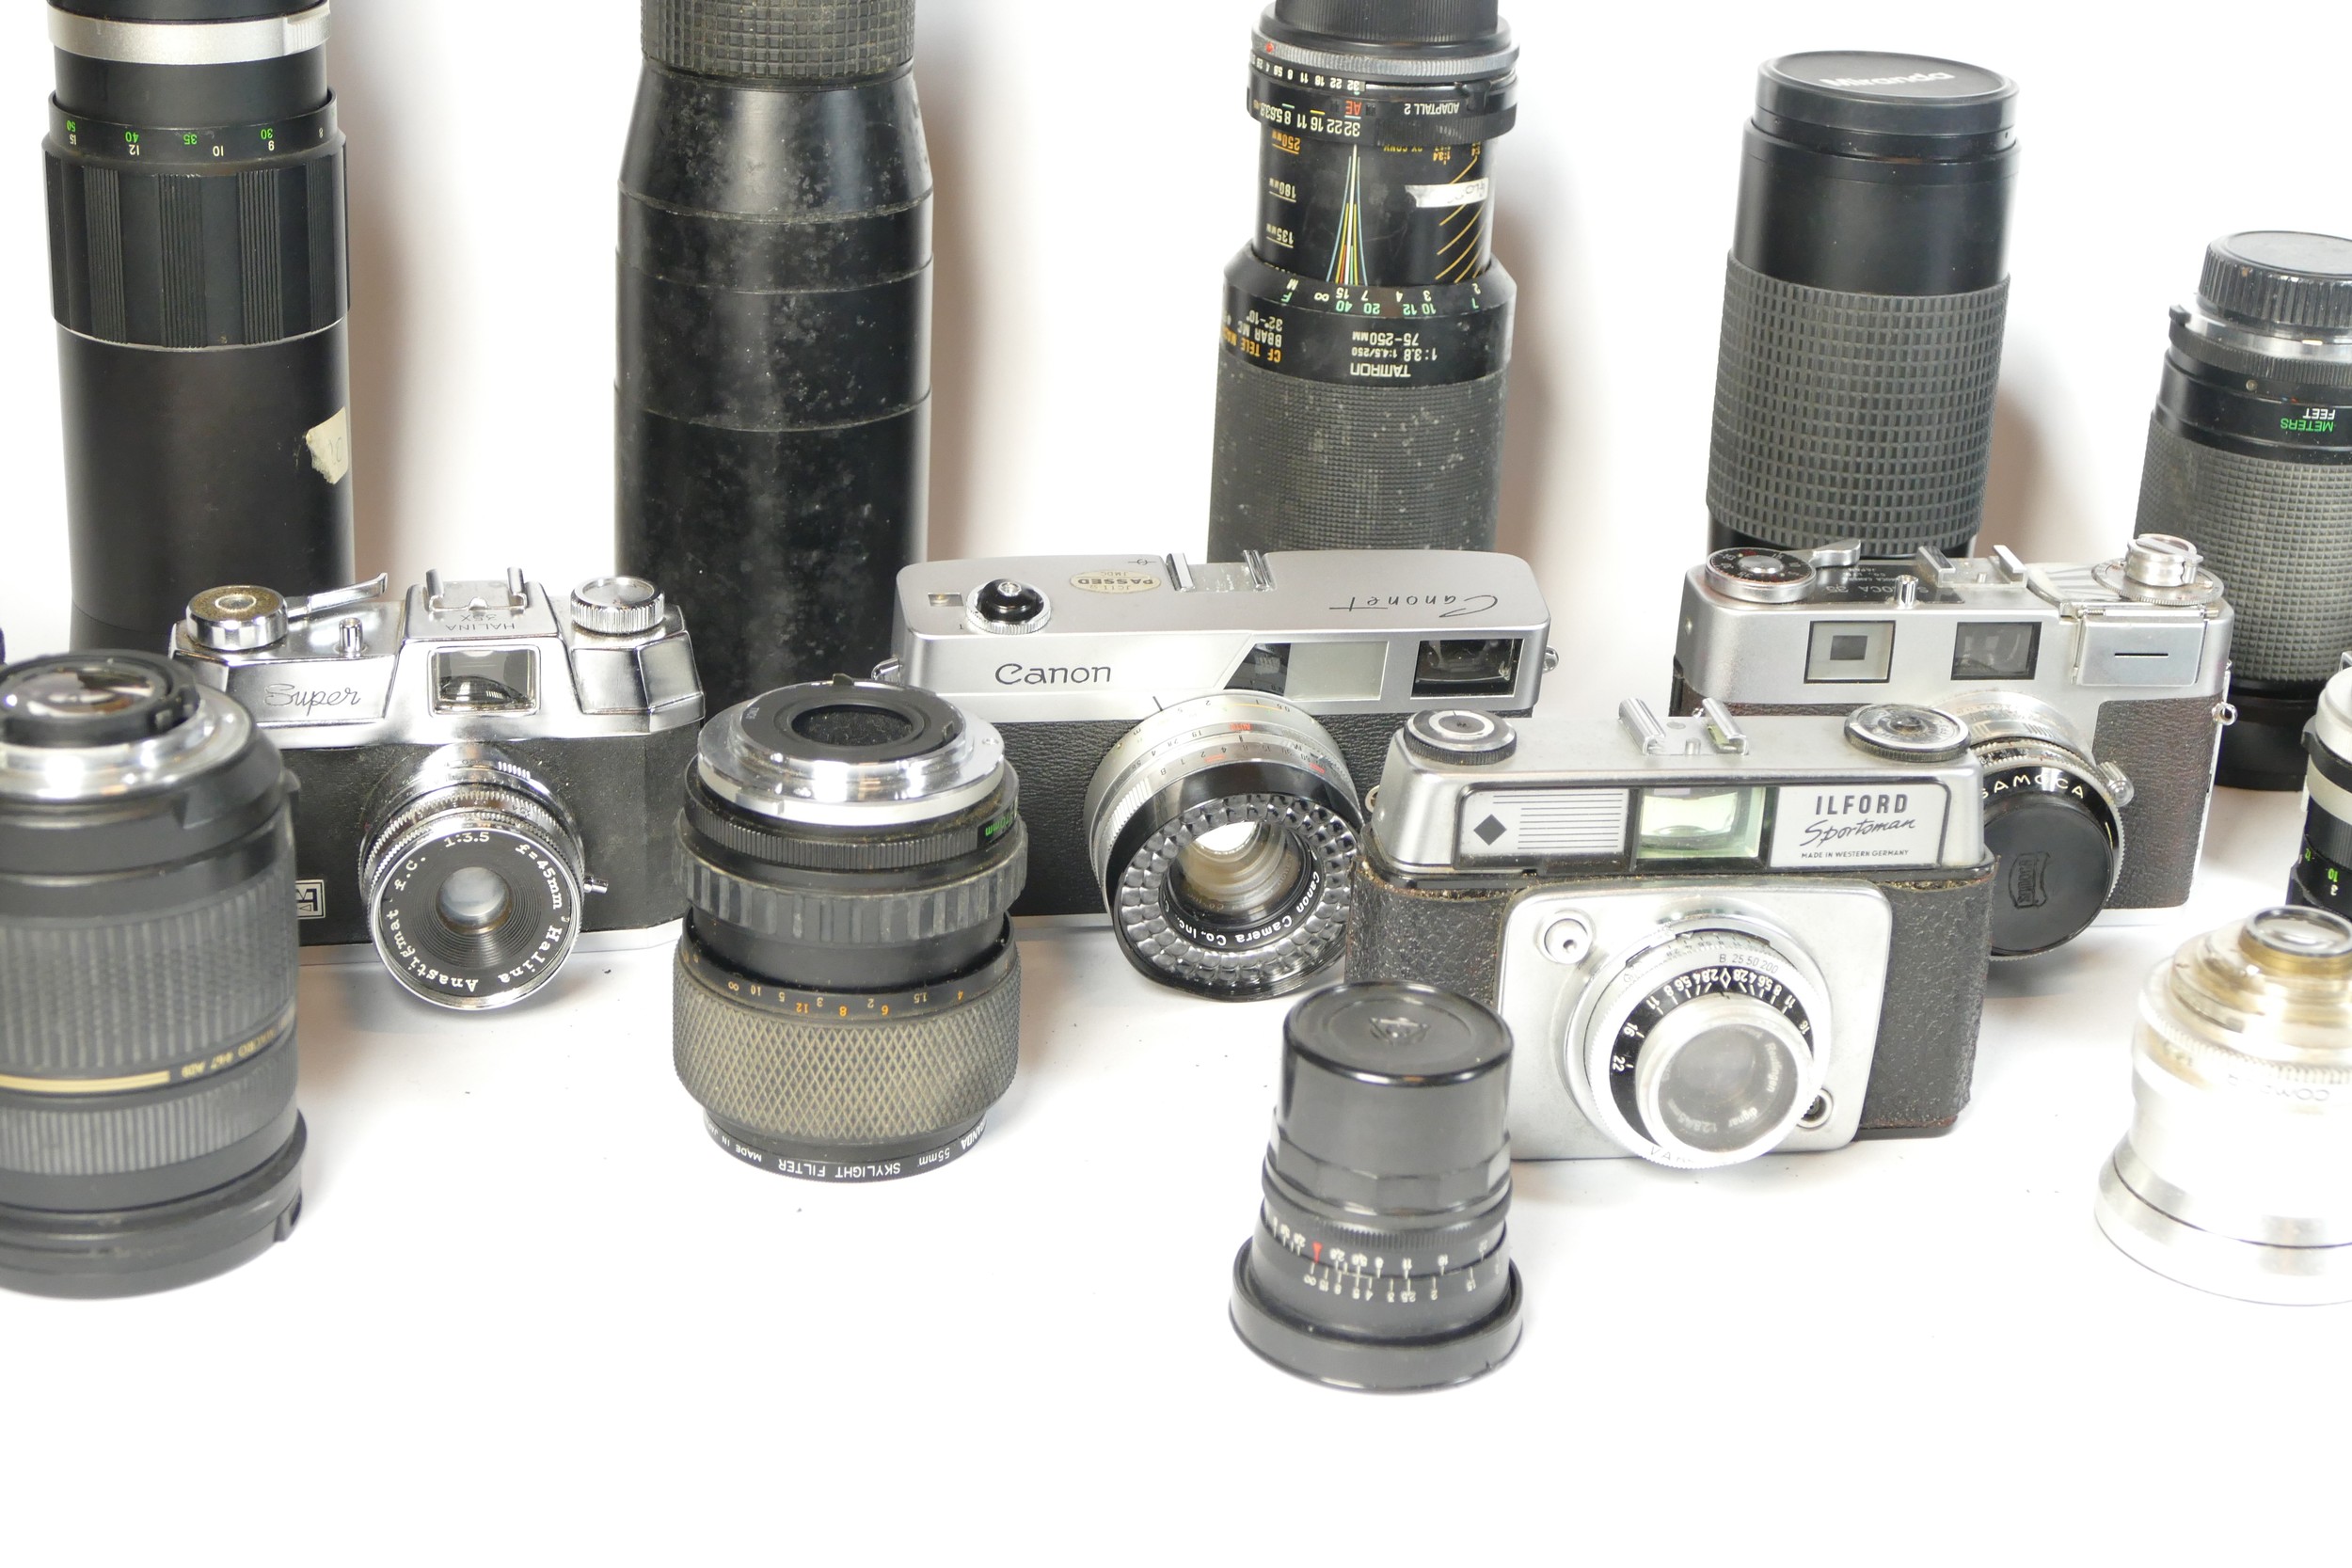 Six SLR vintage film cameras to include a Pentax Super A, a Samoca 35, a Halina 35x and an Ilford - Image 2 of 4